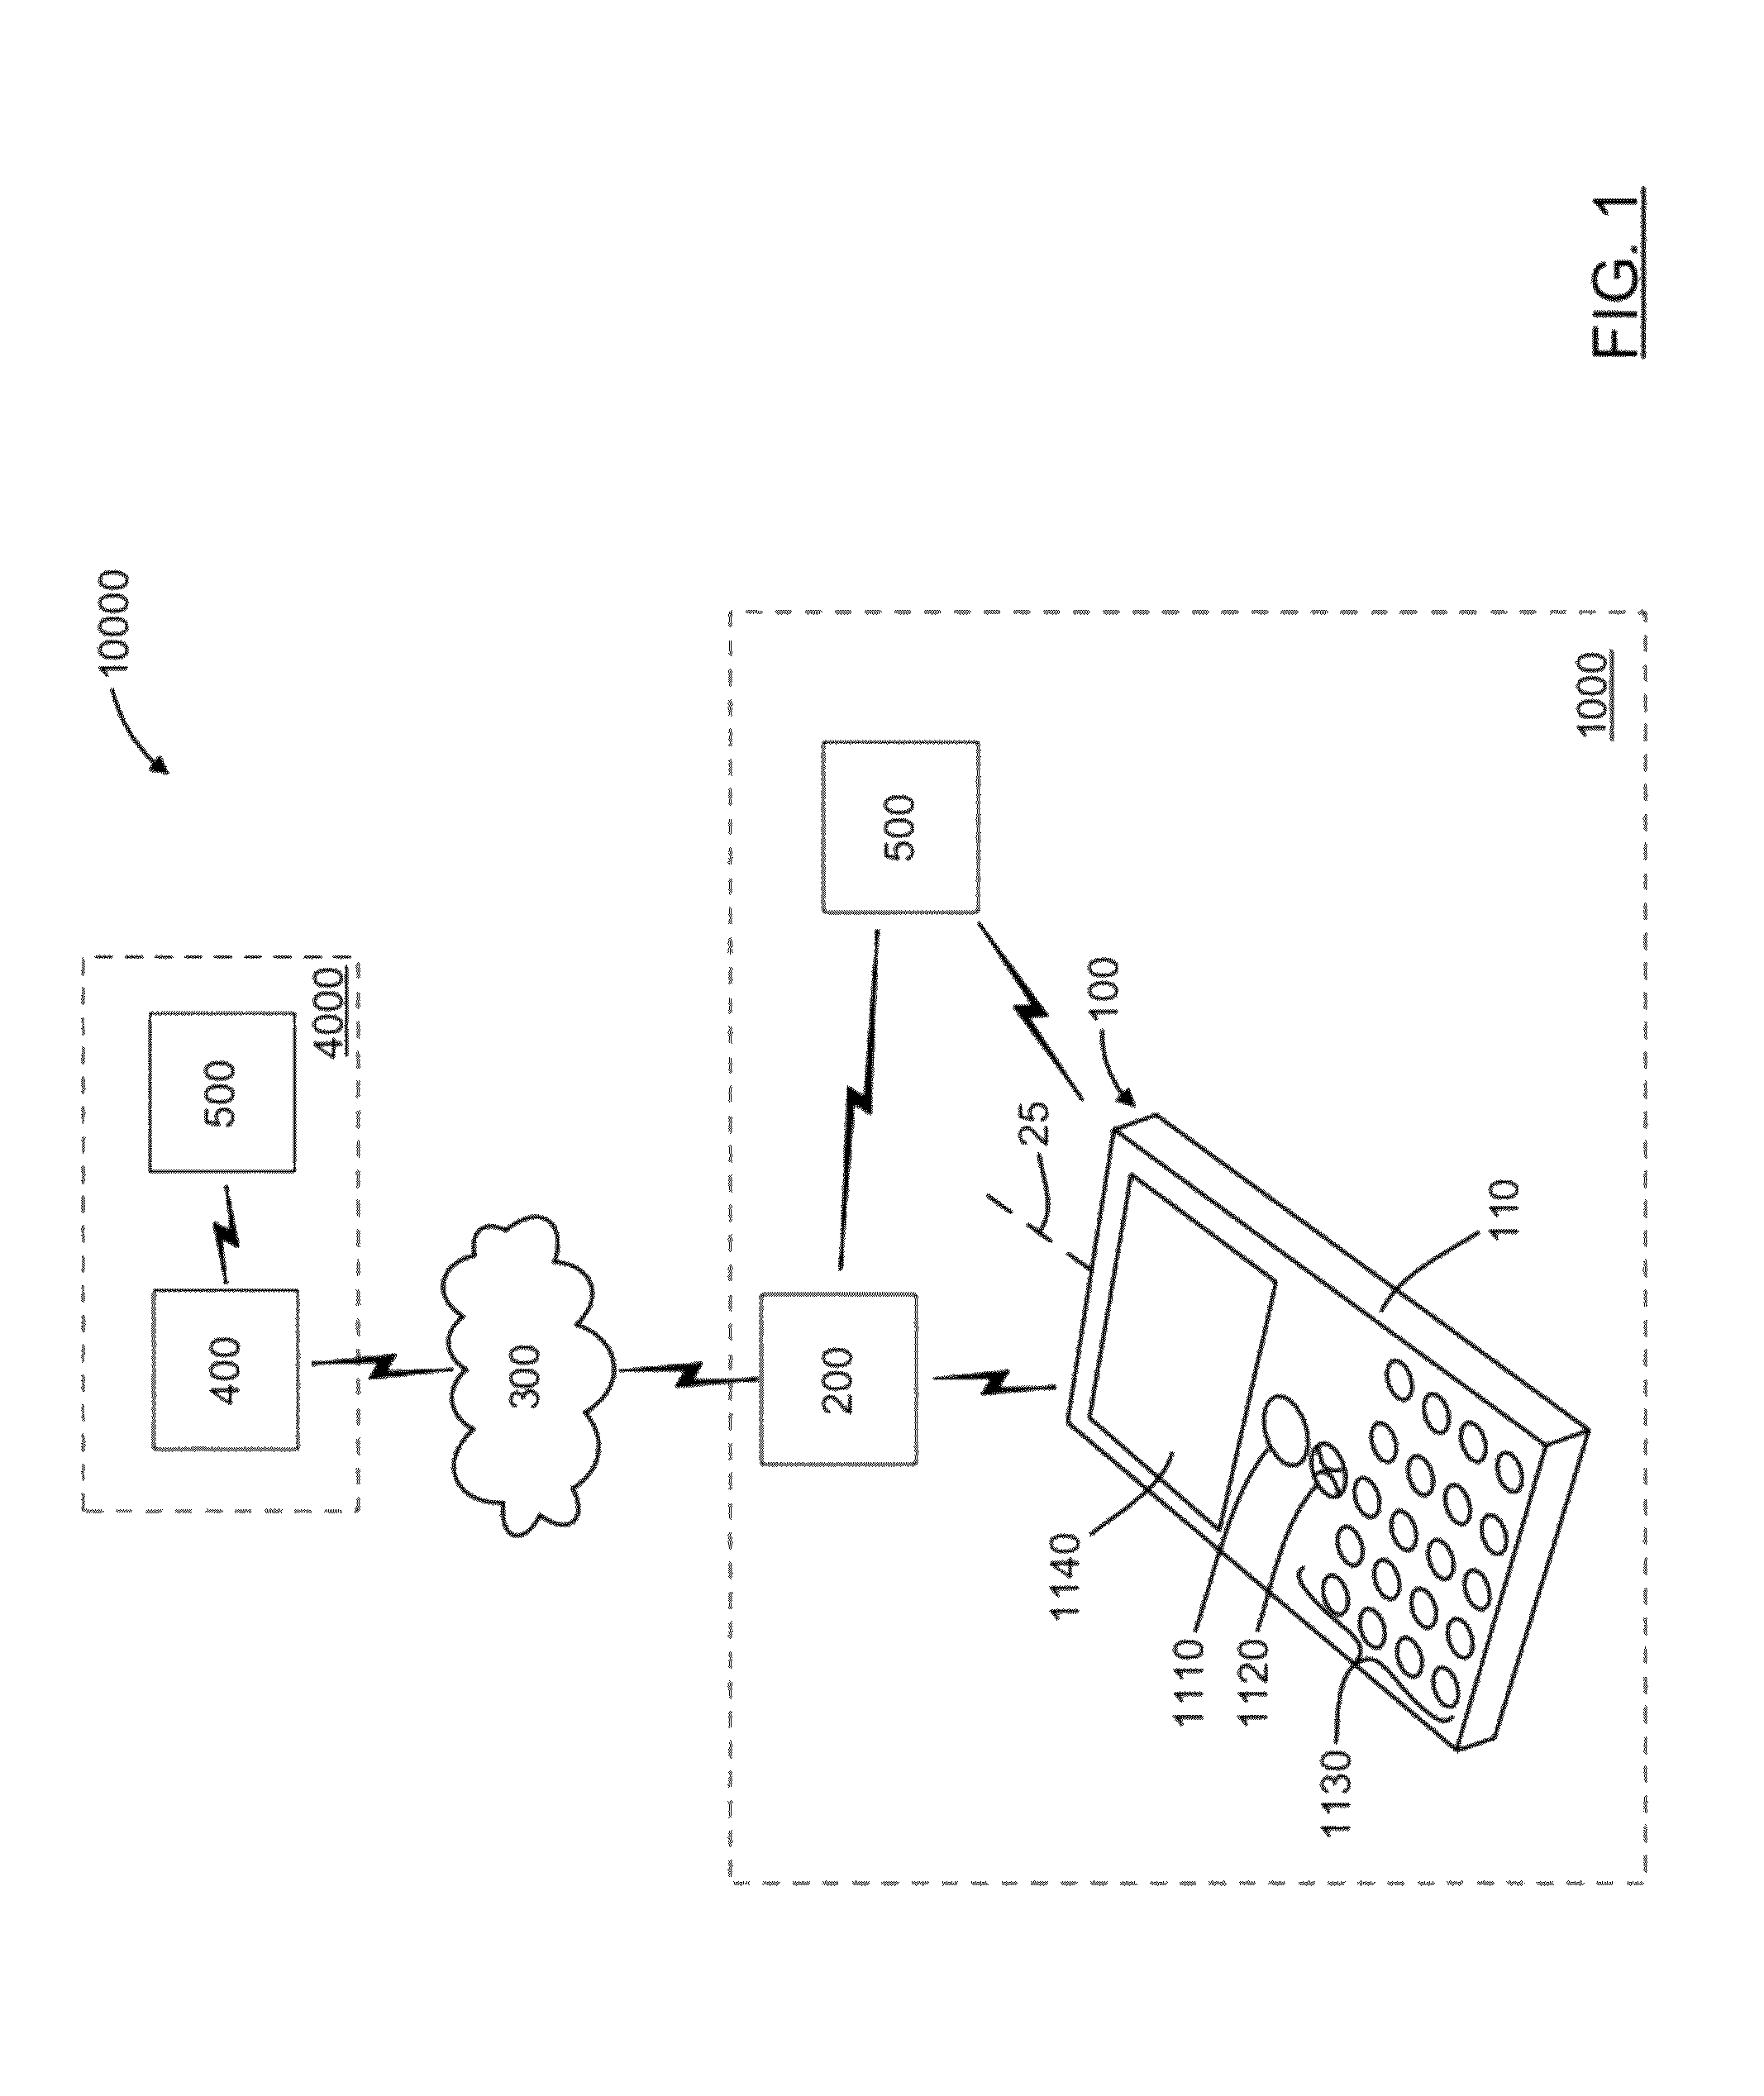 Method and system operative to process monochrome image data